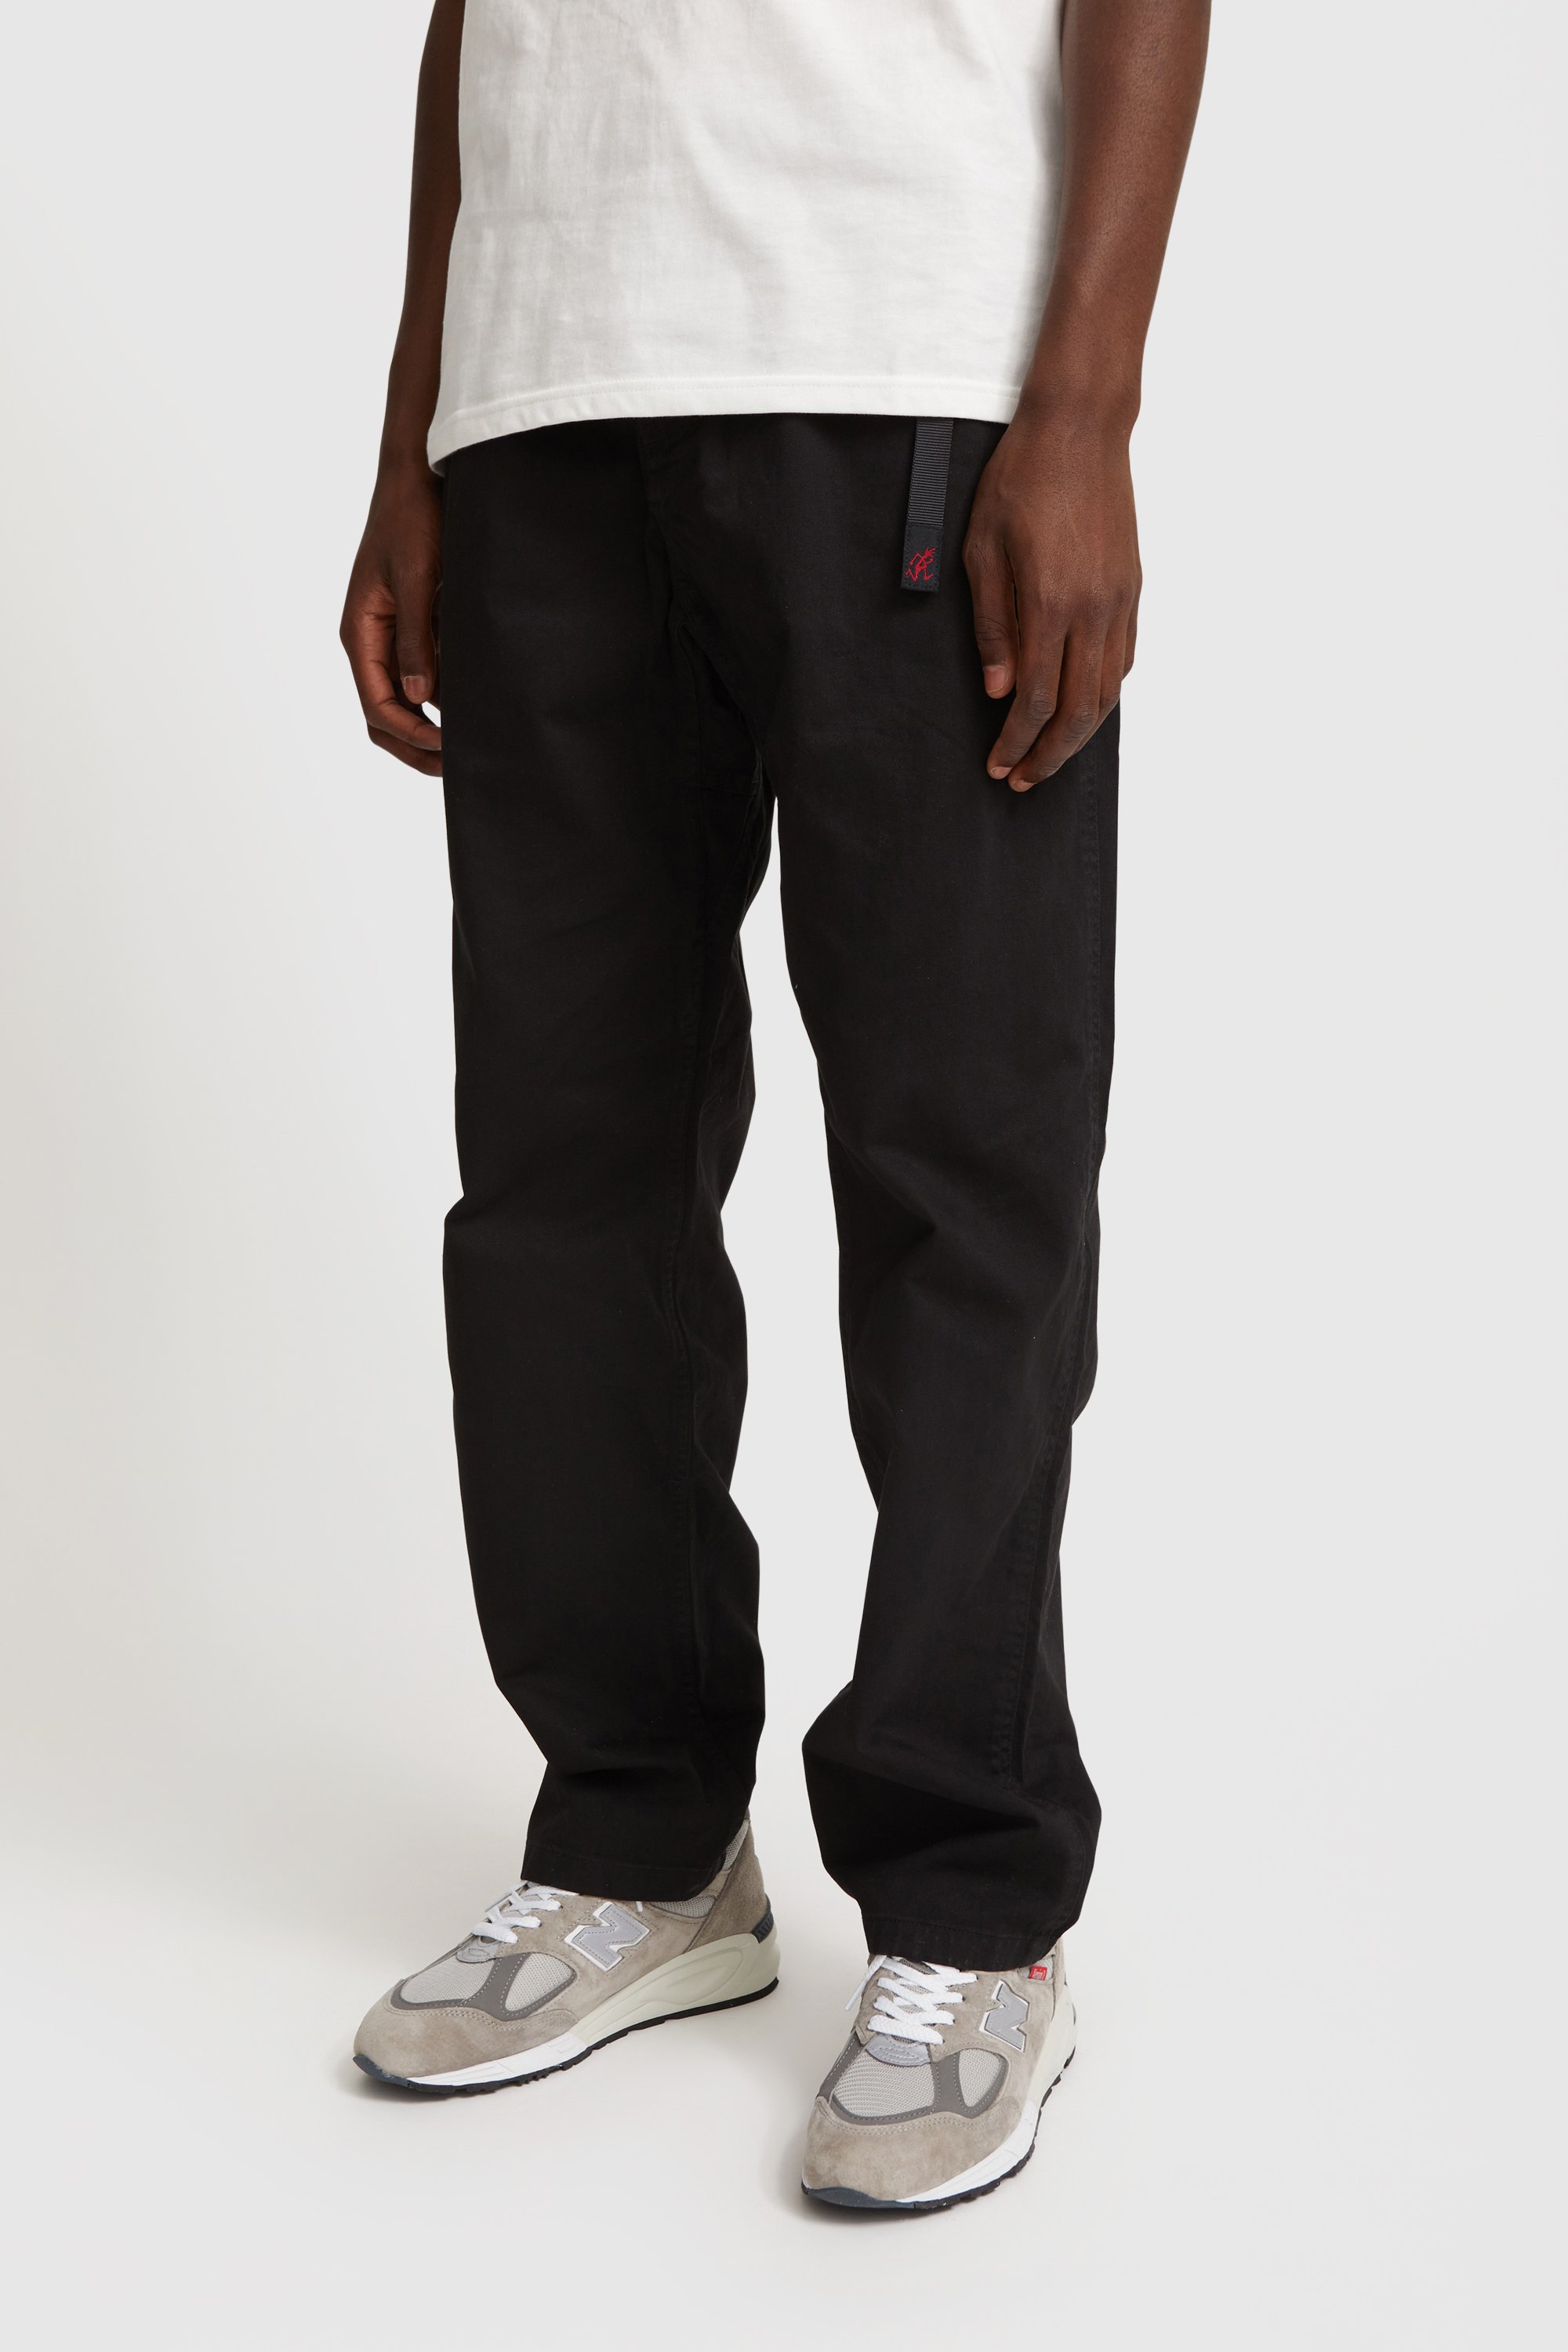 WTAPS Wmill-Trousers 01 / Trousers Olive drab | WoodWood.com